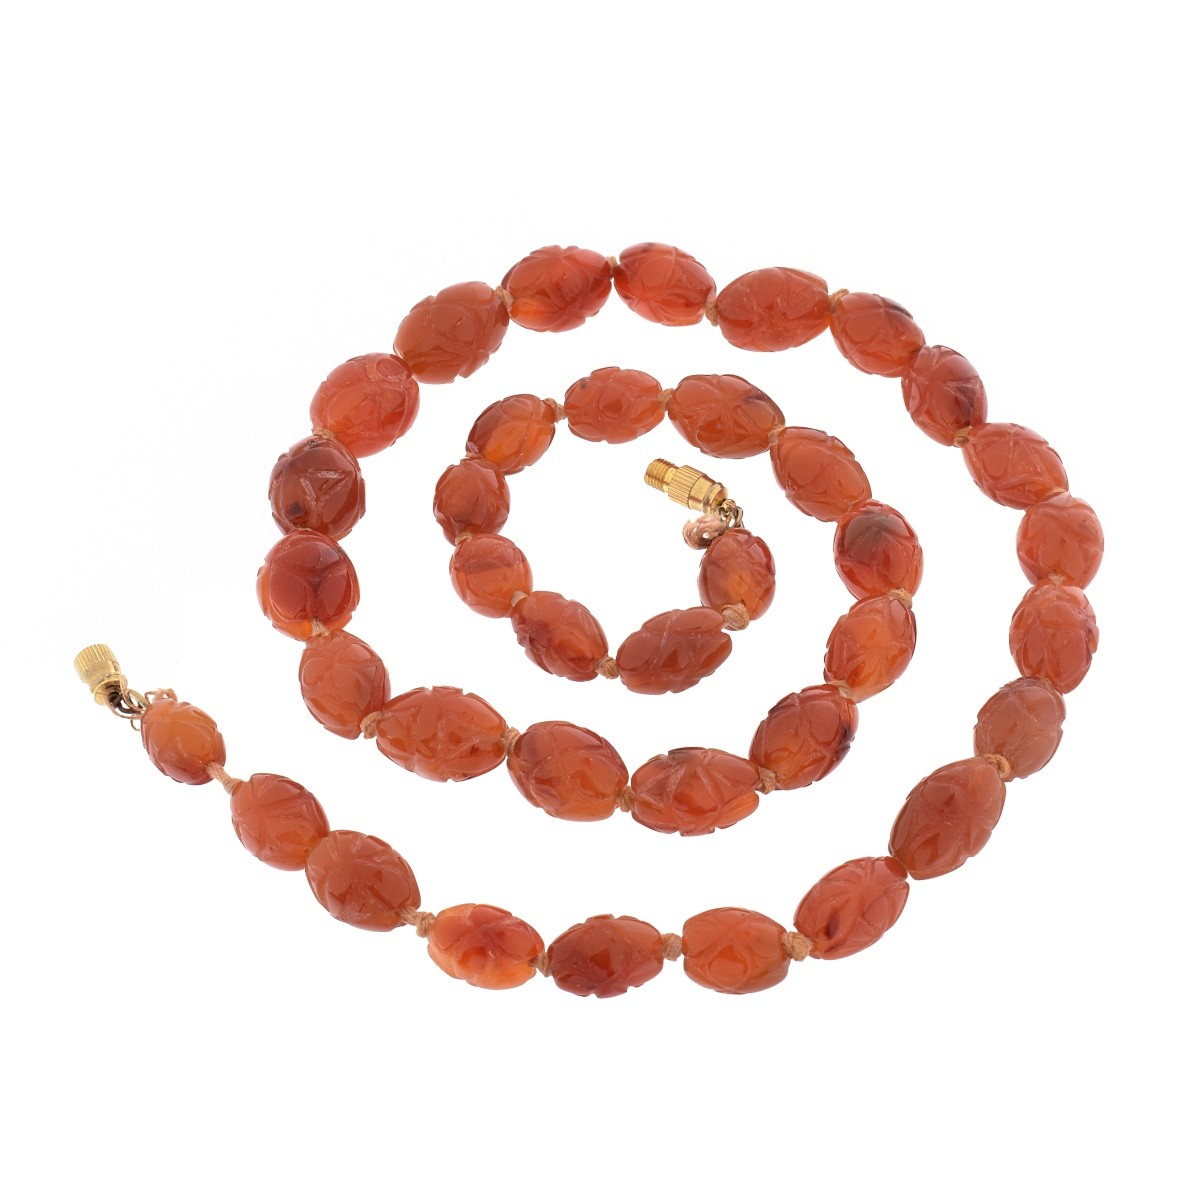 Chinese Carnelian Agate Beaded Necklace